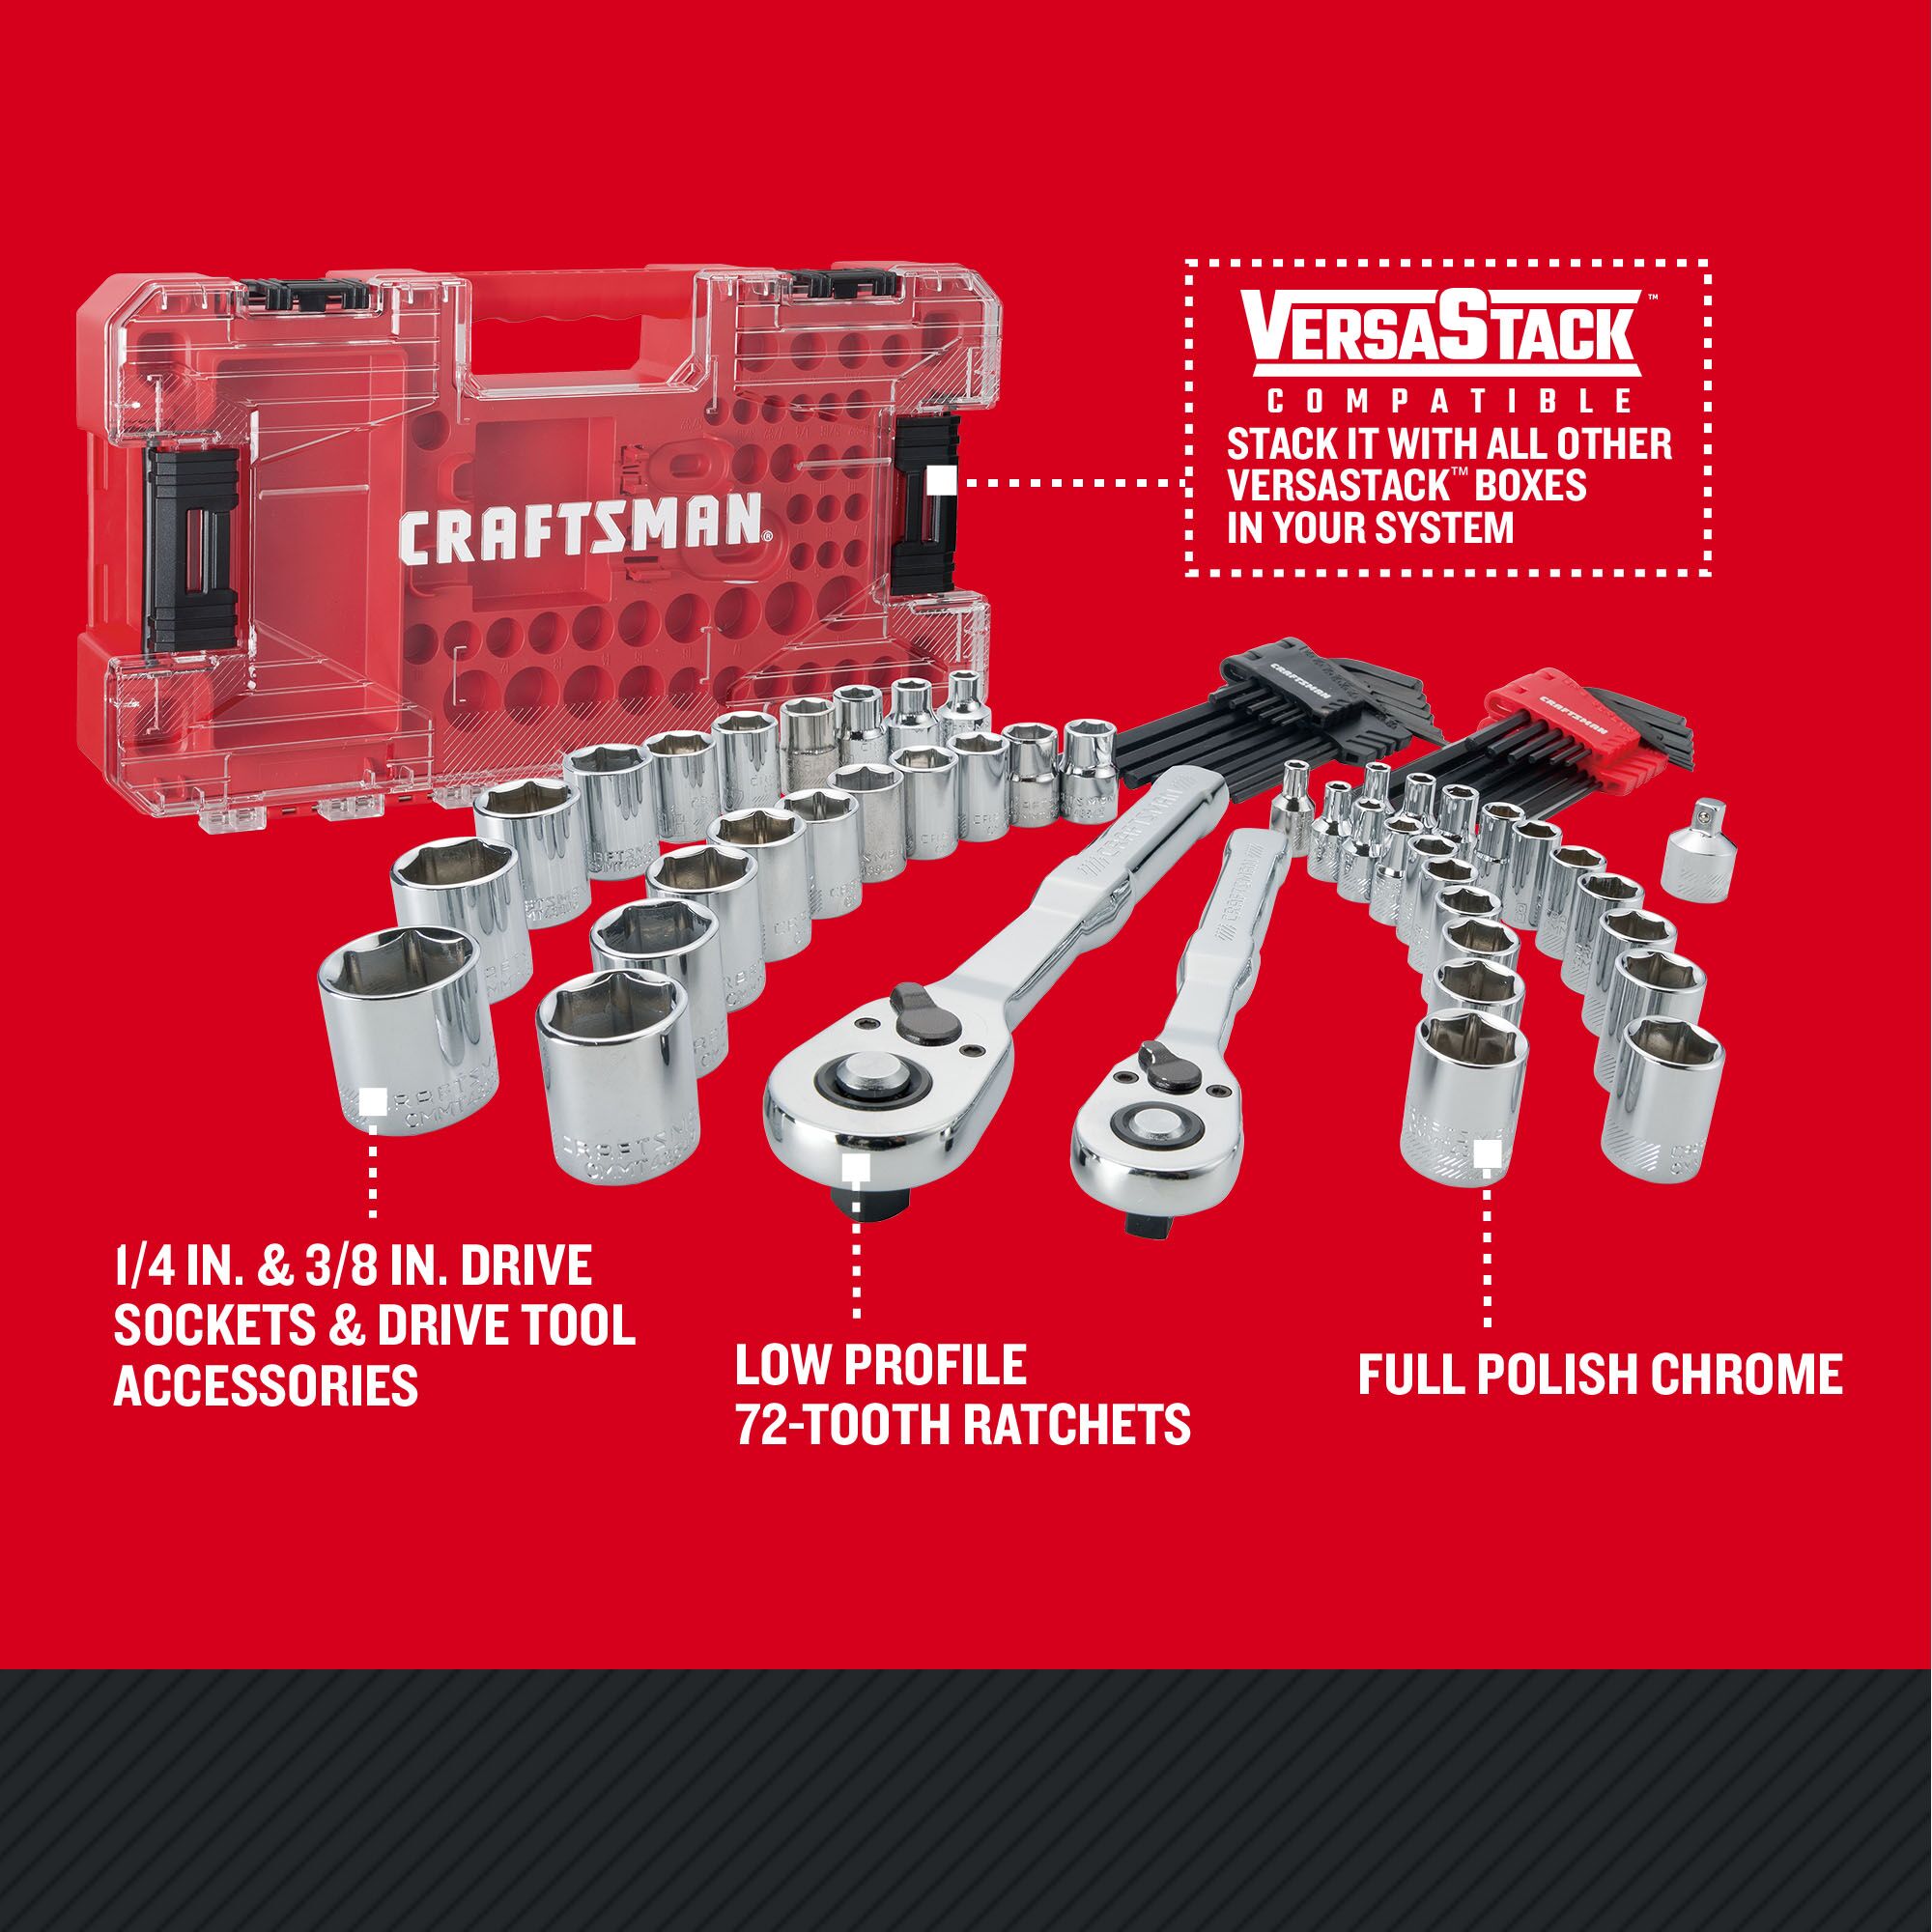 CRAFTSMAN Low Profile 71 piece Mechanics Tool Set with features and benefits highlighted